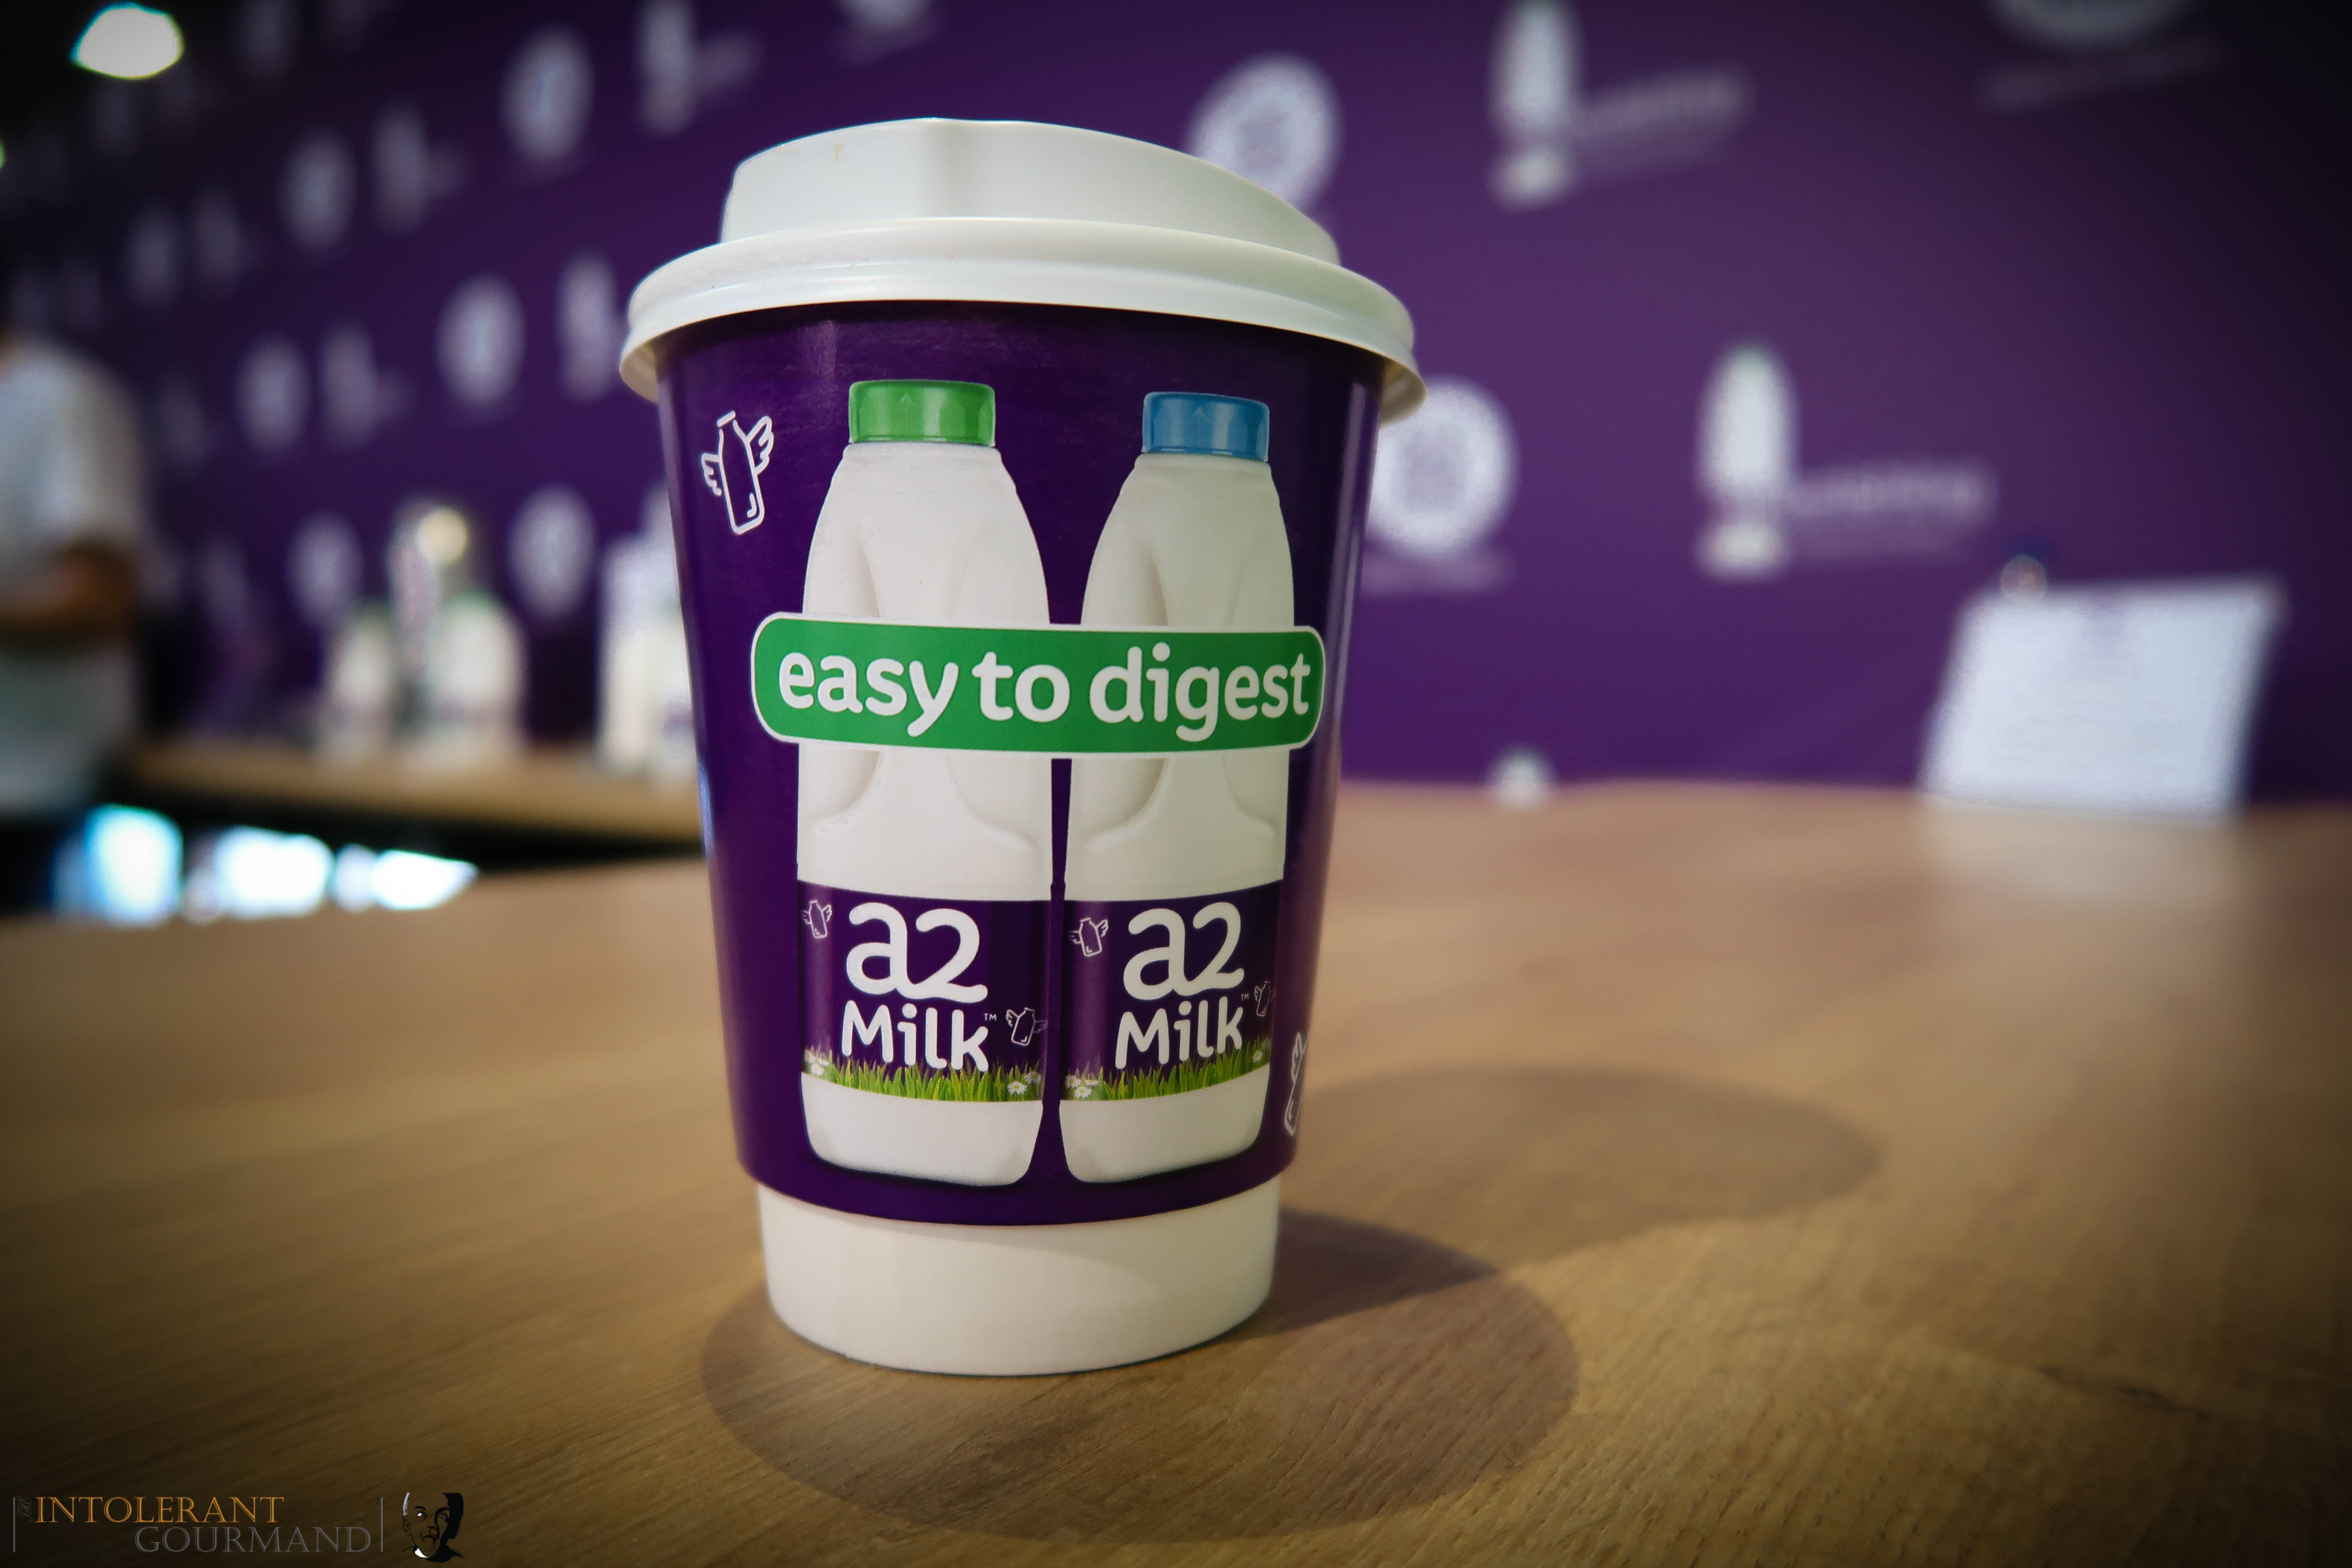 Allergy Show London 2017 - a2 Milk sponsored the Free From Cafe at the Allegry Show. This is a delicious latte made using a2 Milk! www.intolerantgourmand.com